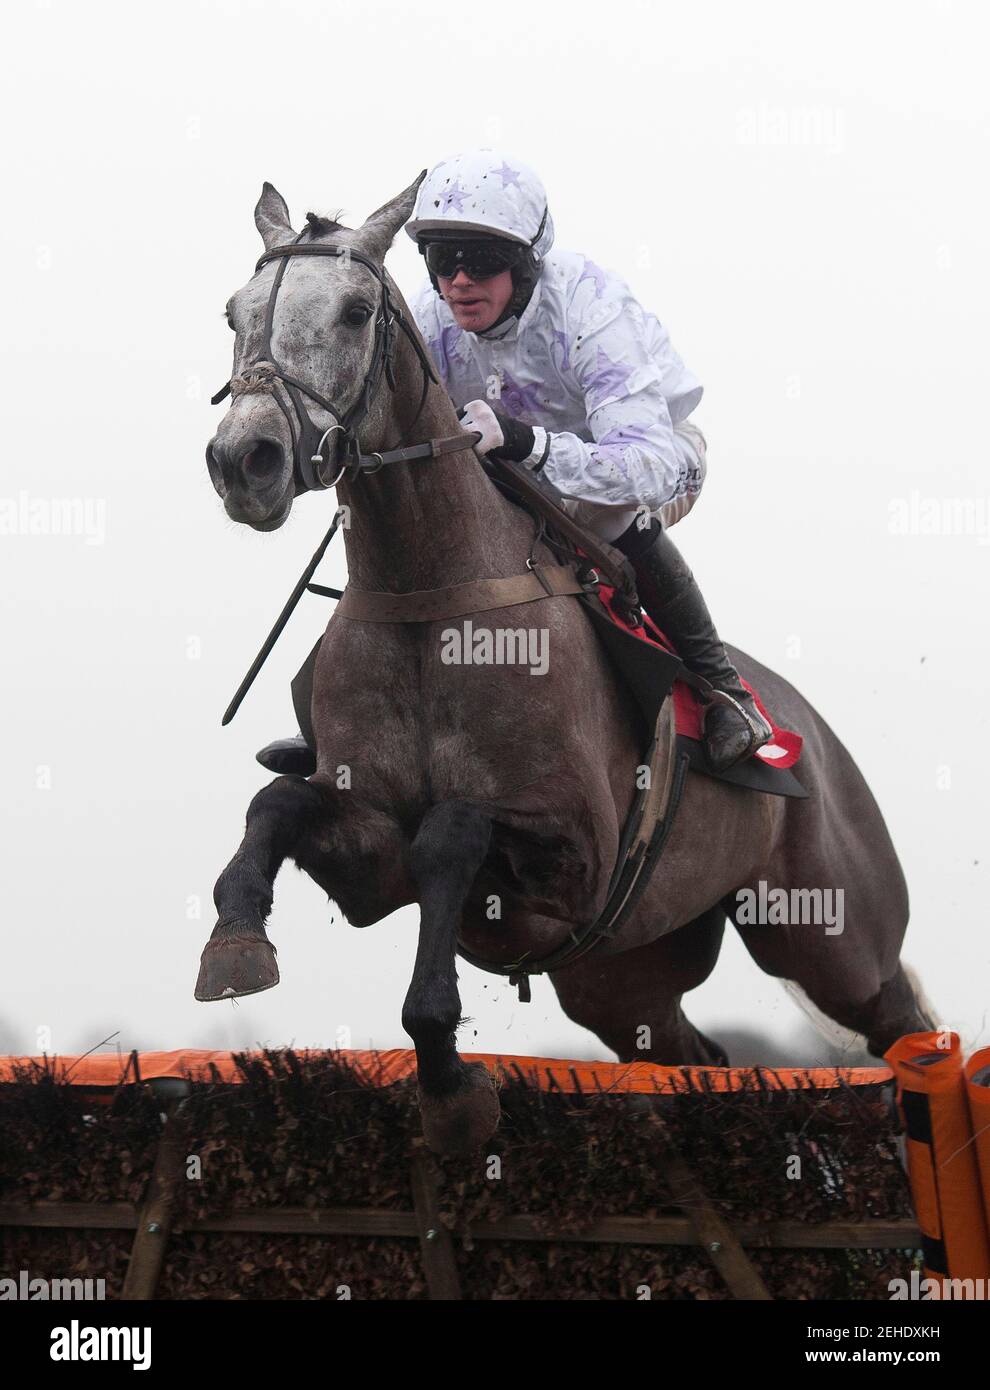 Horse Racing - Kempton  - Kempton Park Racecourse - 12/1/13  Cloudy Copper ridden by Richie McLernon before going on to win the 13.30 williamhill.com Novices' Hurdle Race  Mandatory Credit: Action Images / Julian Herbert  Livepic Stock Photo